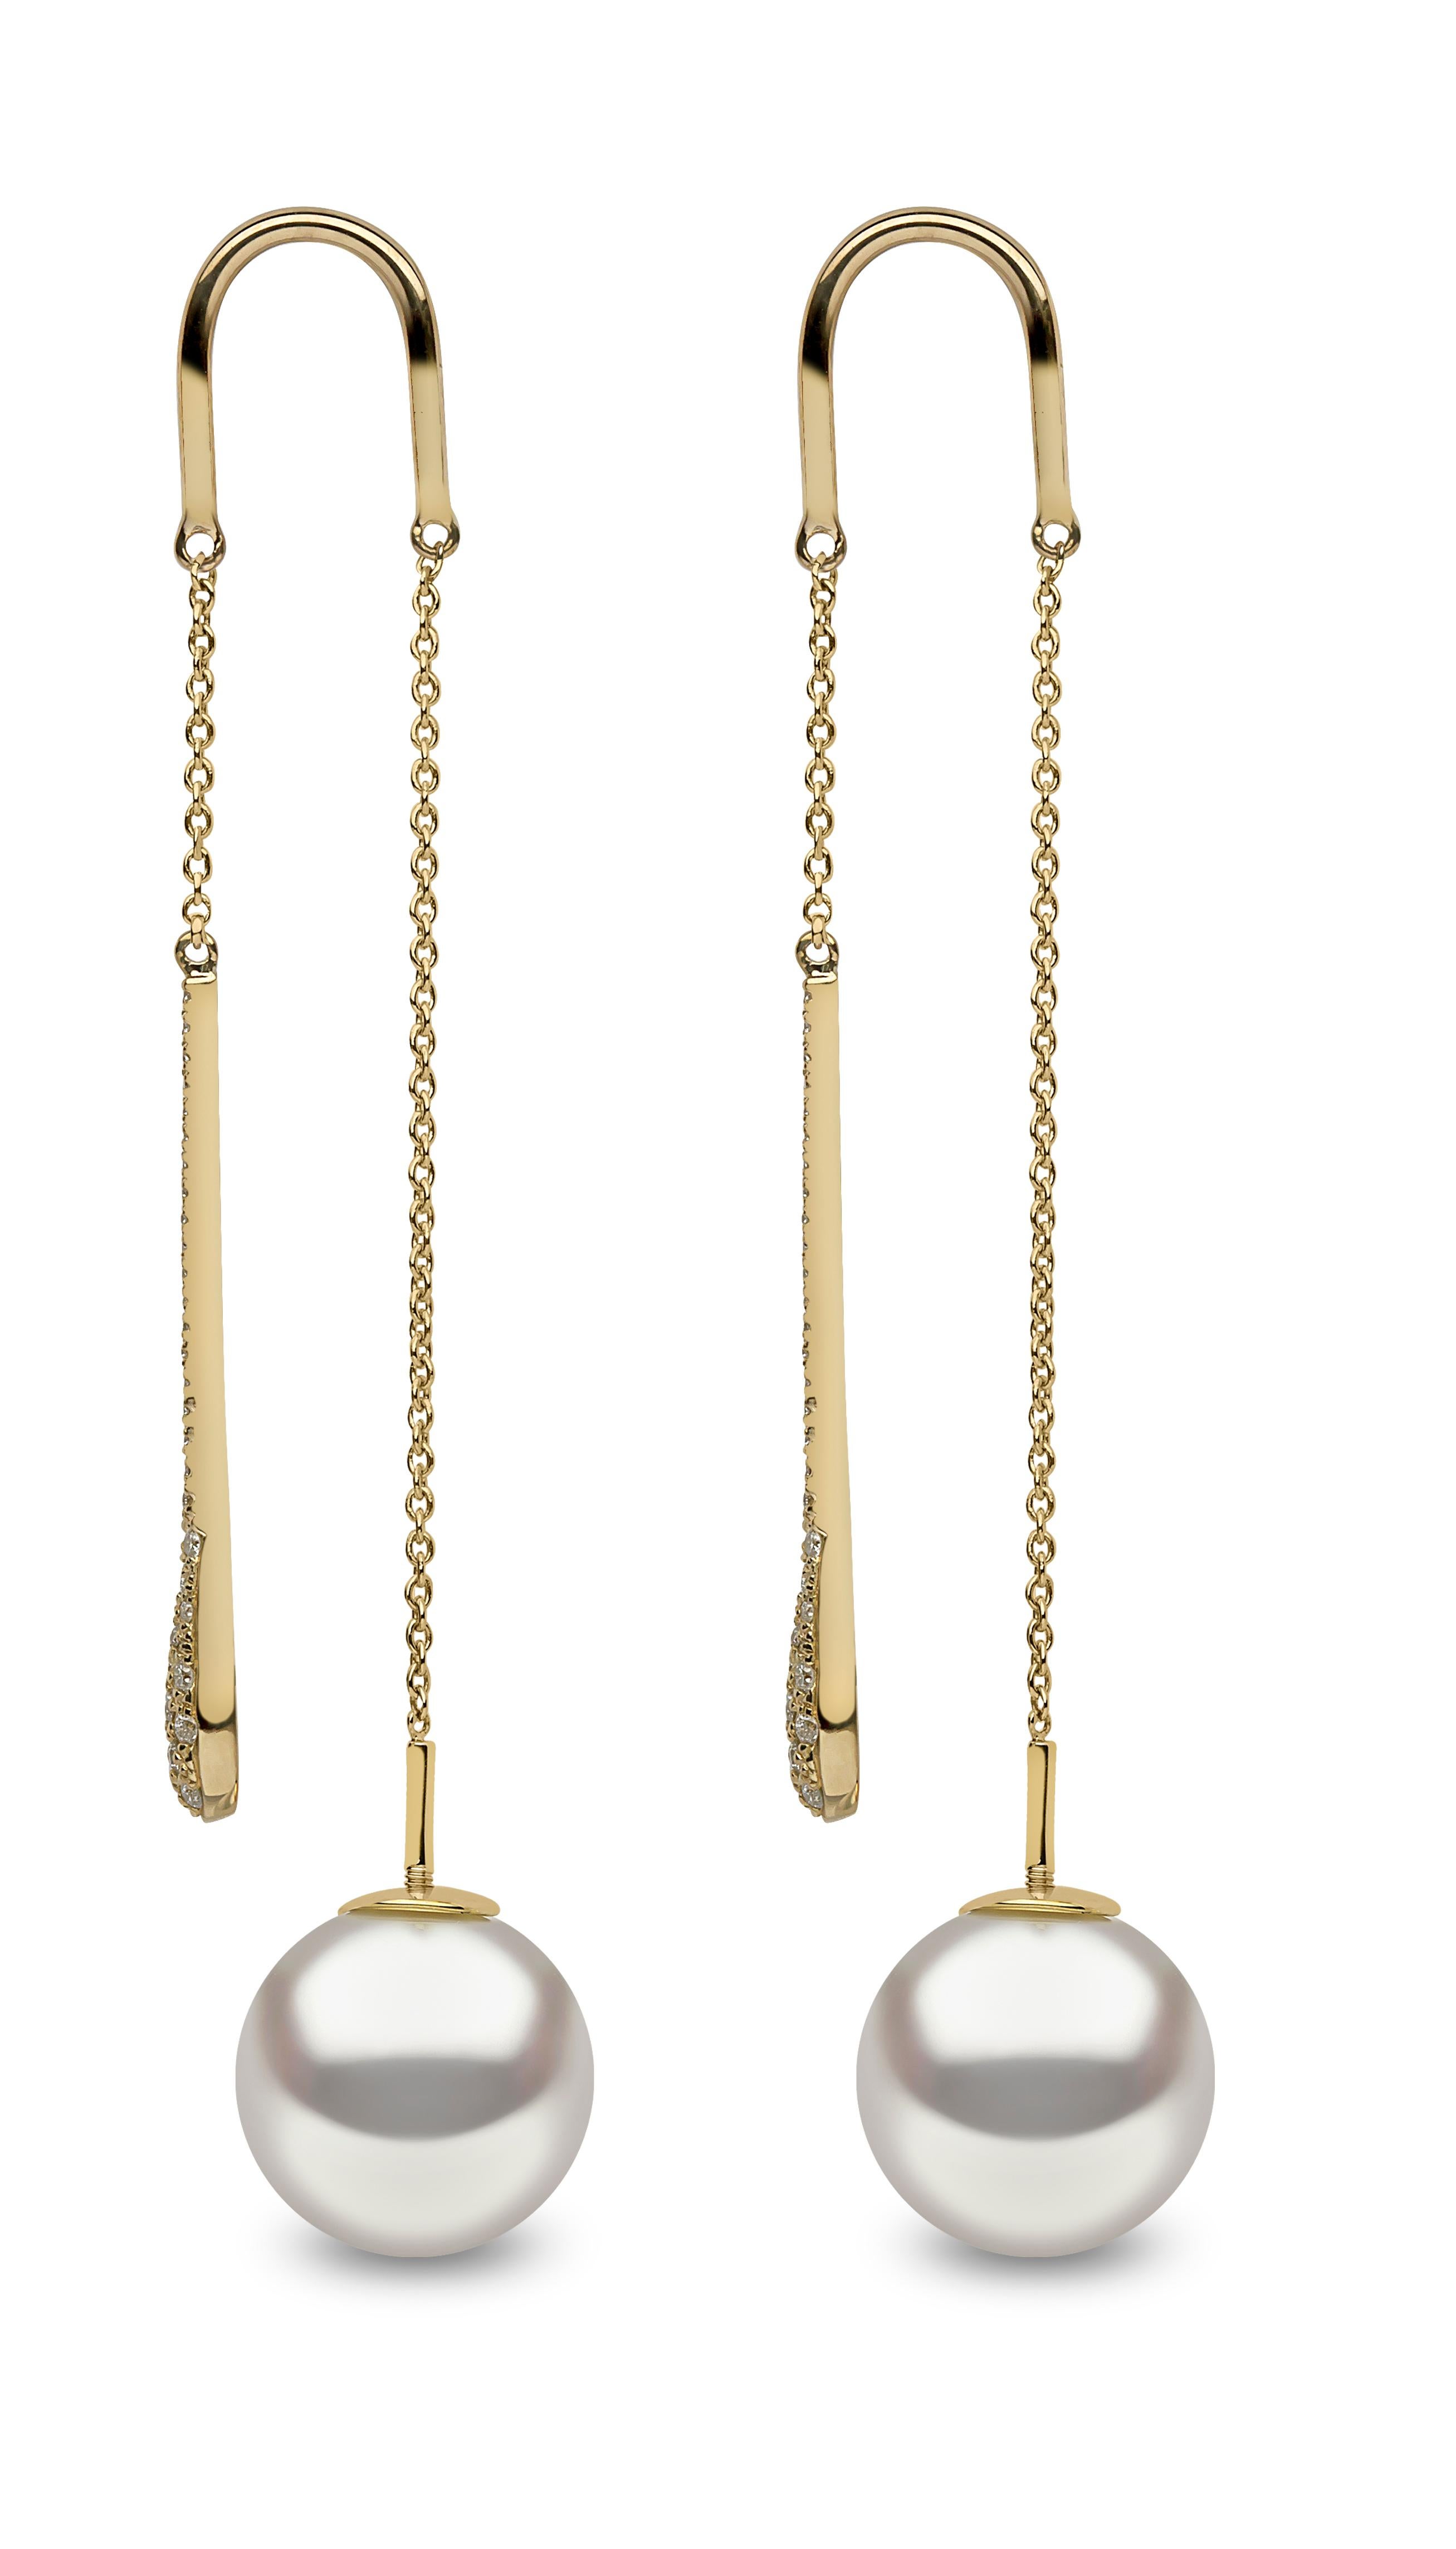 These contemporary earrings by Yoko London are extremely modern in their design. Featuring an elegant diamond drop which hangs from the front and a lustrous South Sea pearl which hangs from behind the lobe. To put these earrings on, you simply